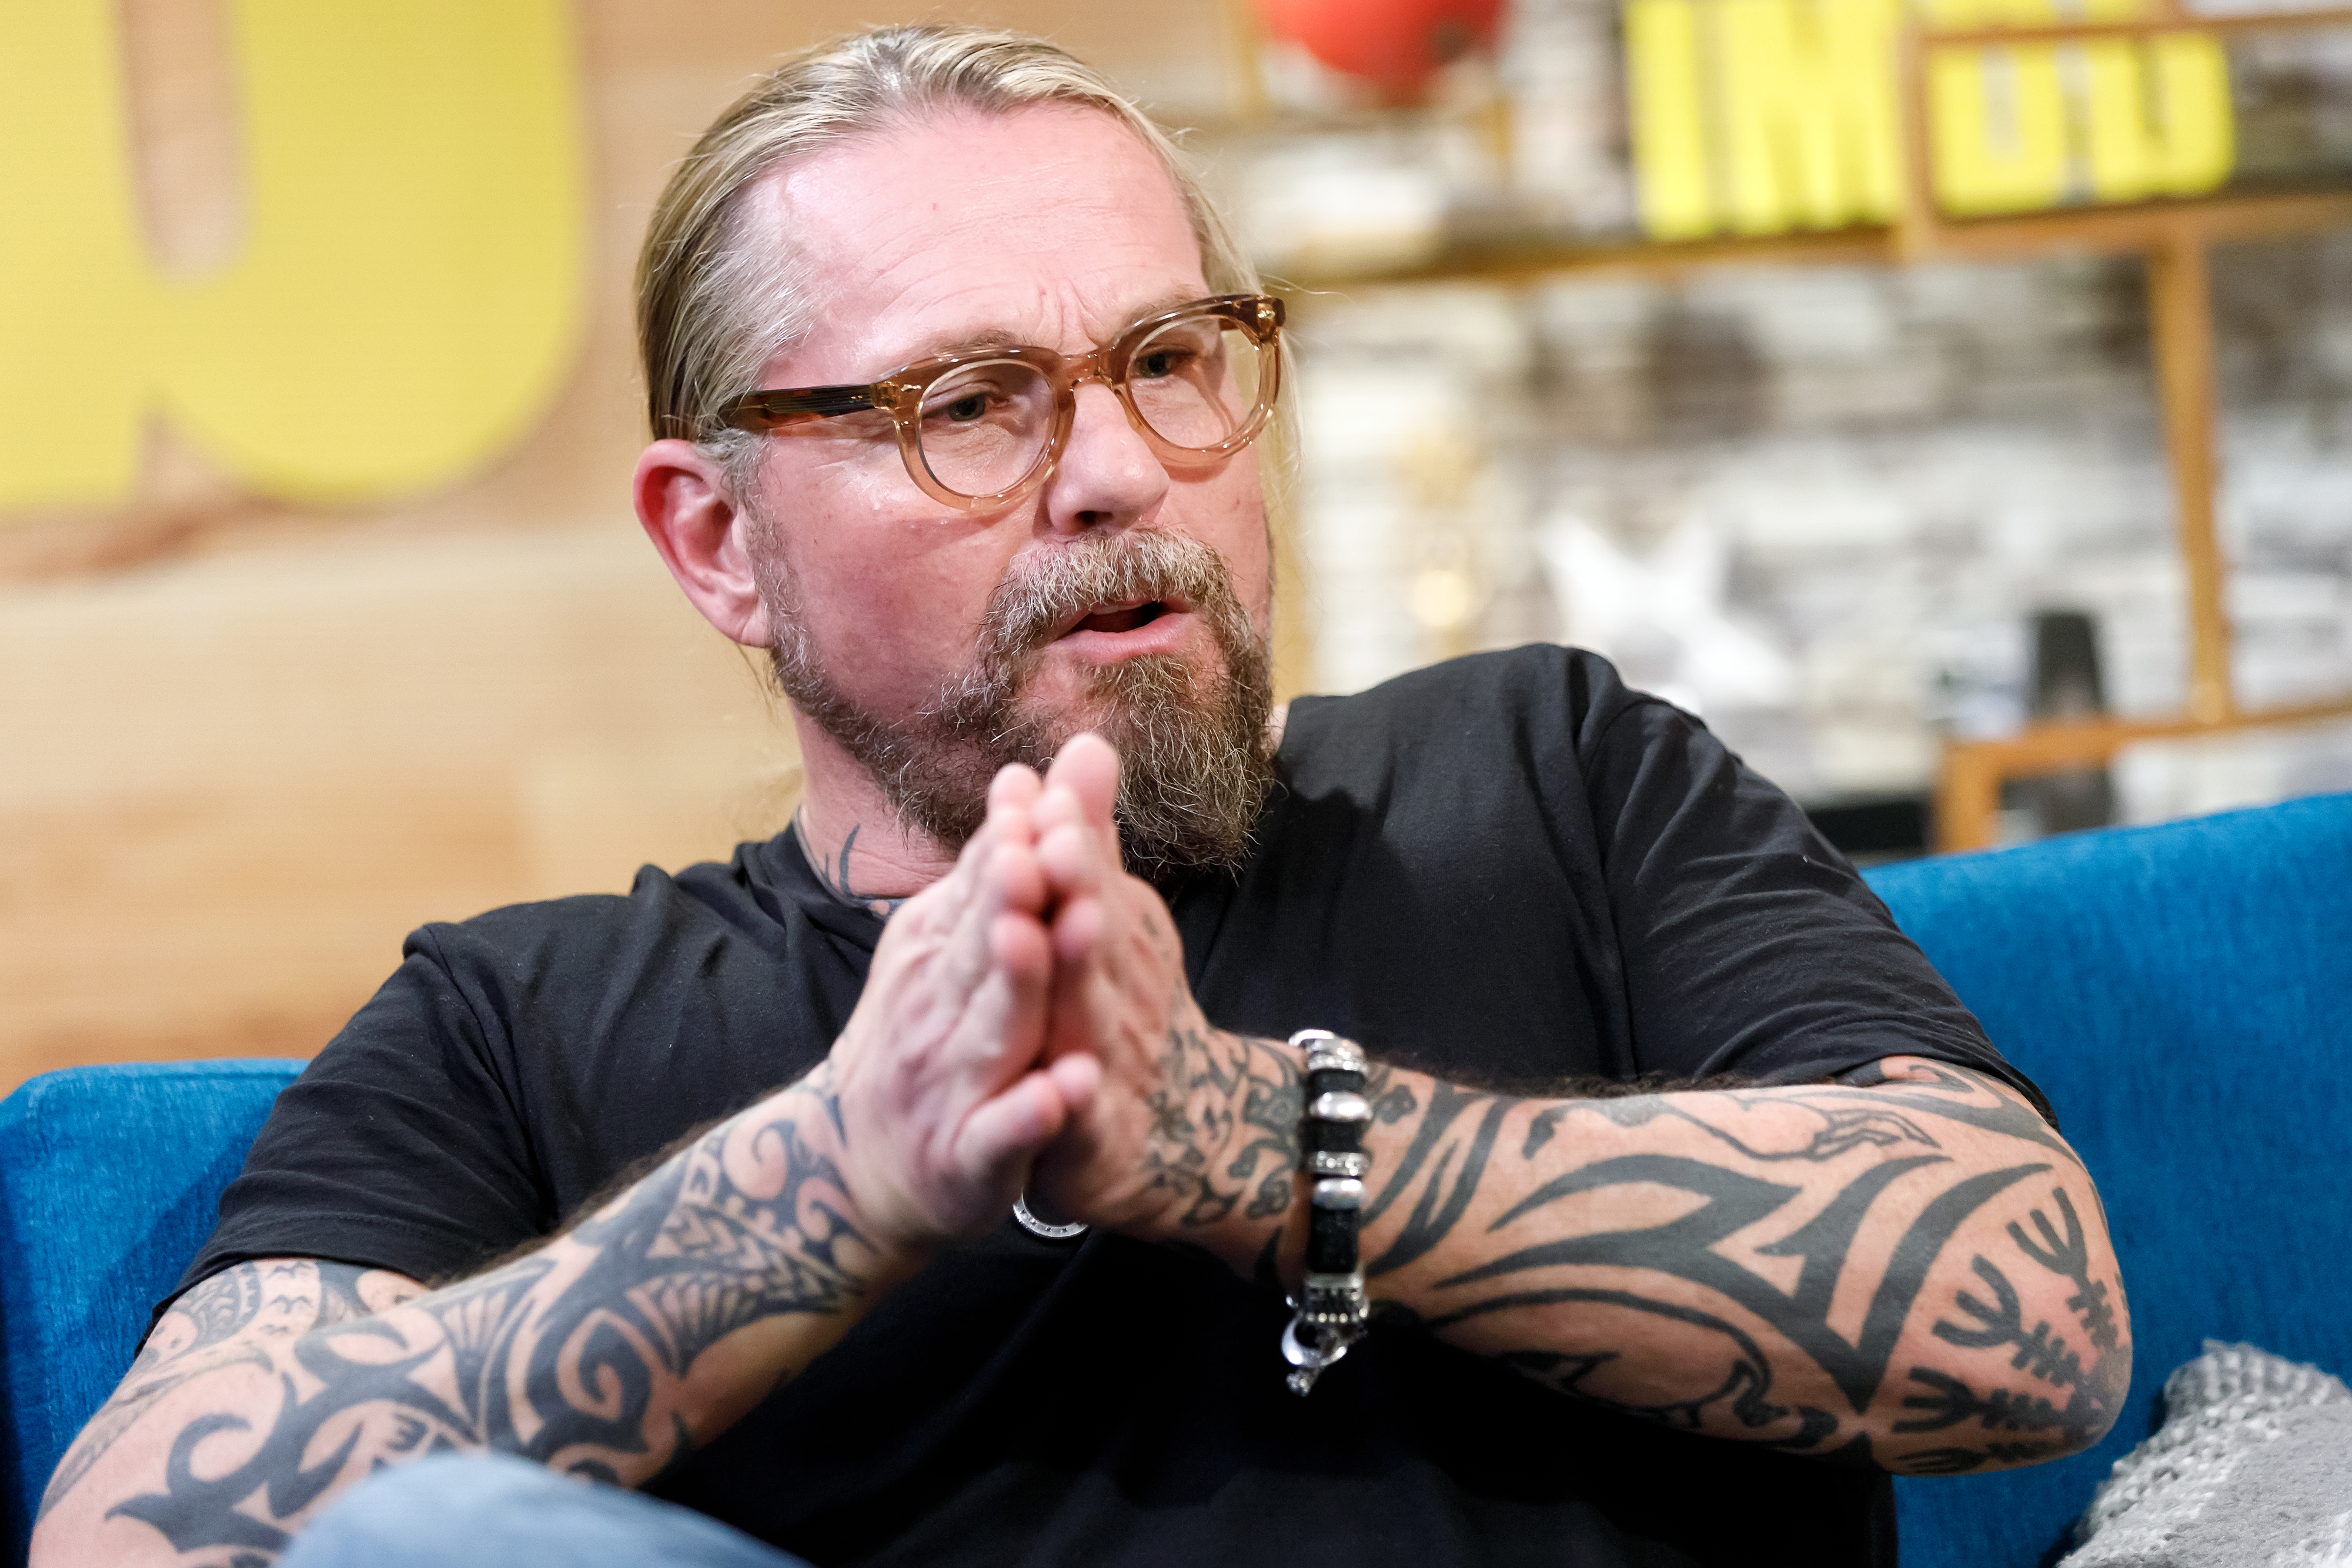 Kurt Sutter with beard and tattoos wearing glasses is seated with his hands clasped